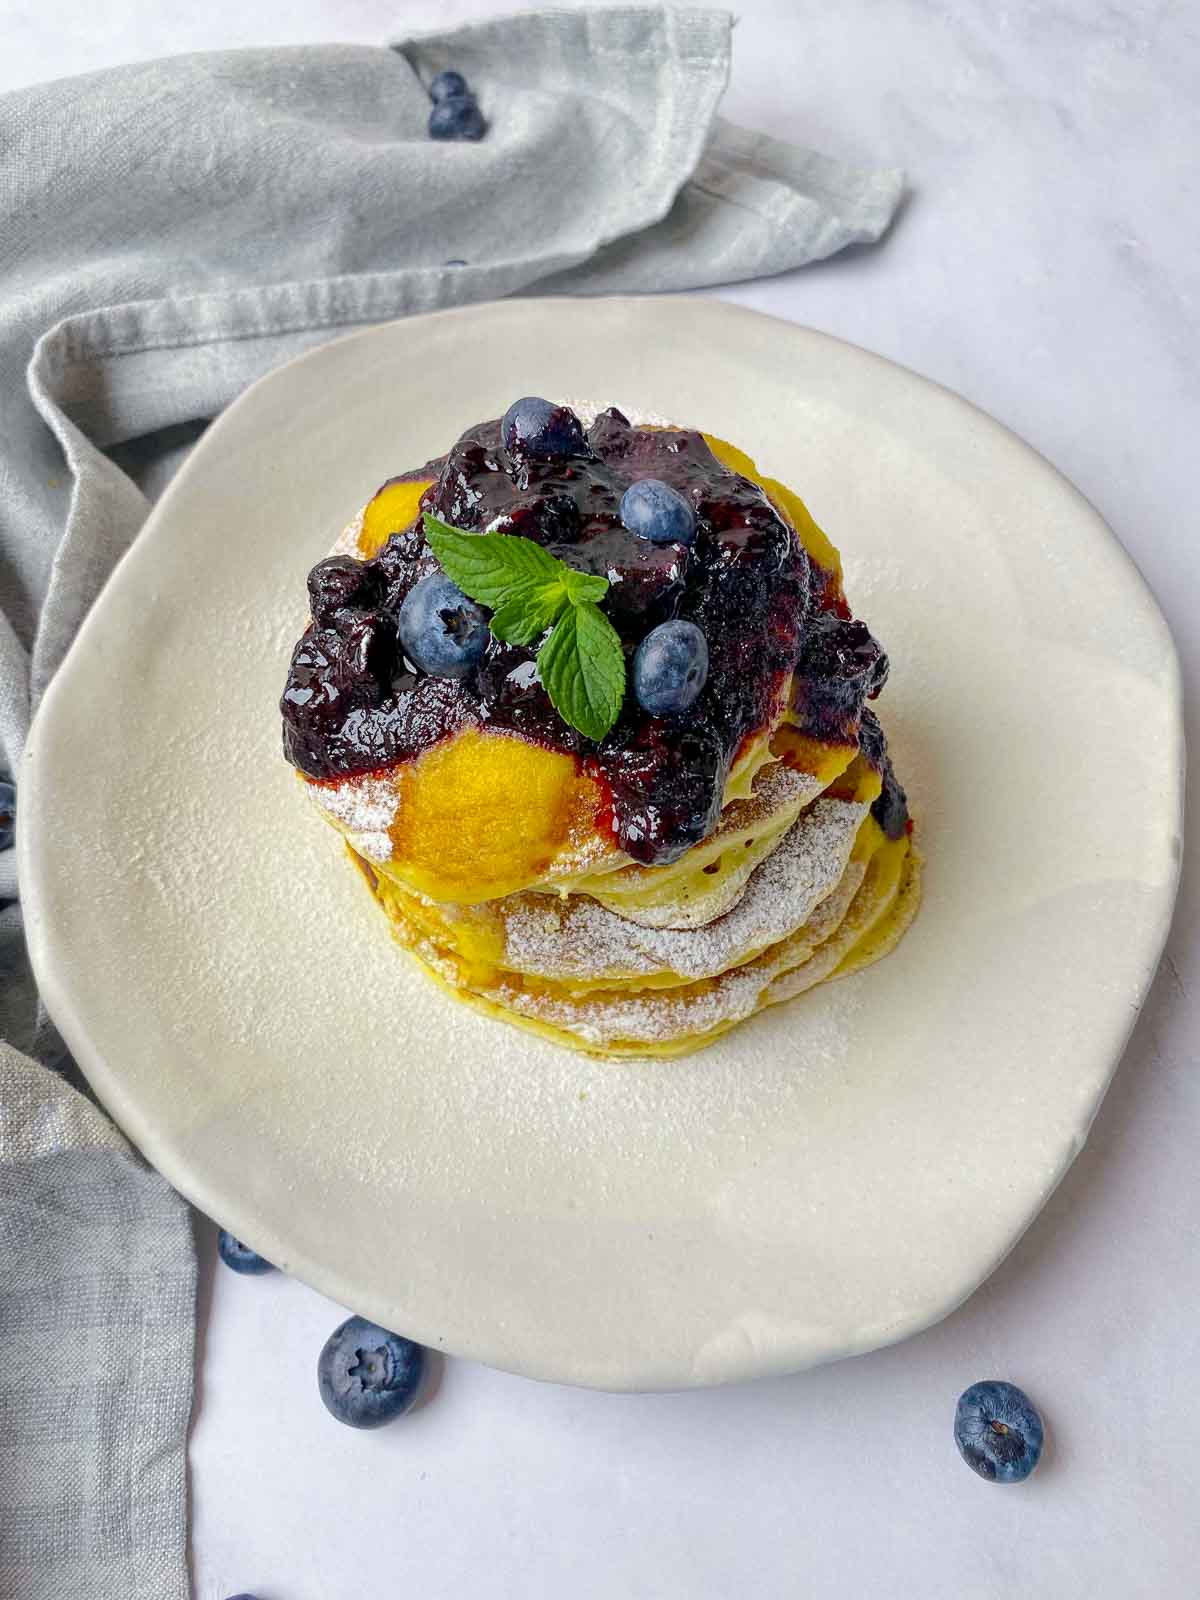 A plate of lemon ricotta pancakes covered in blueberry compote with some fresh blueberries added for good measure.